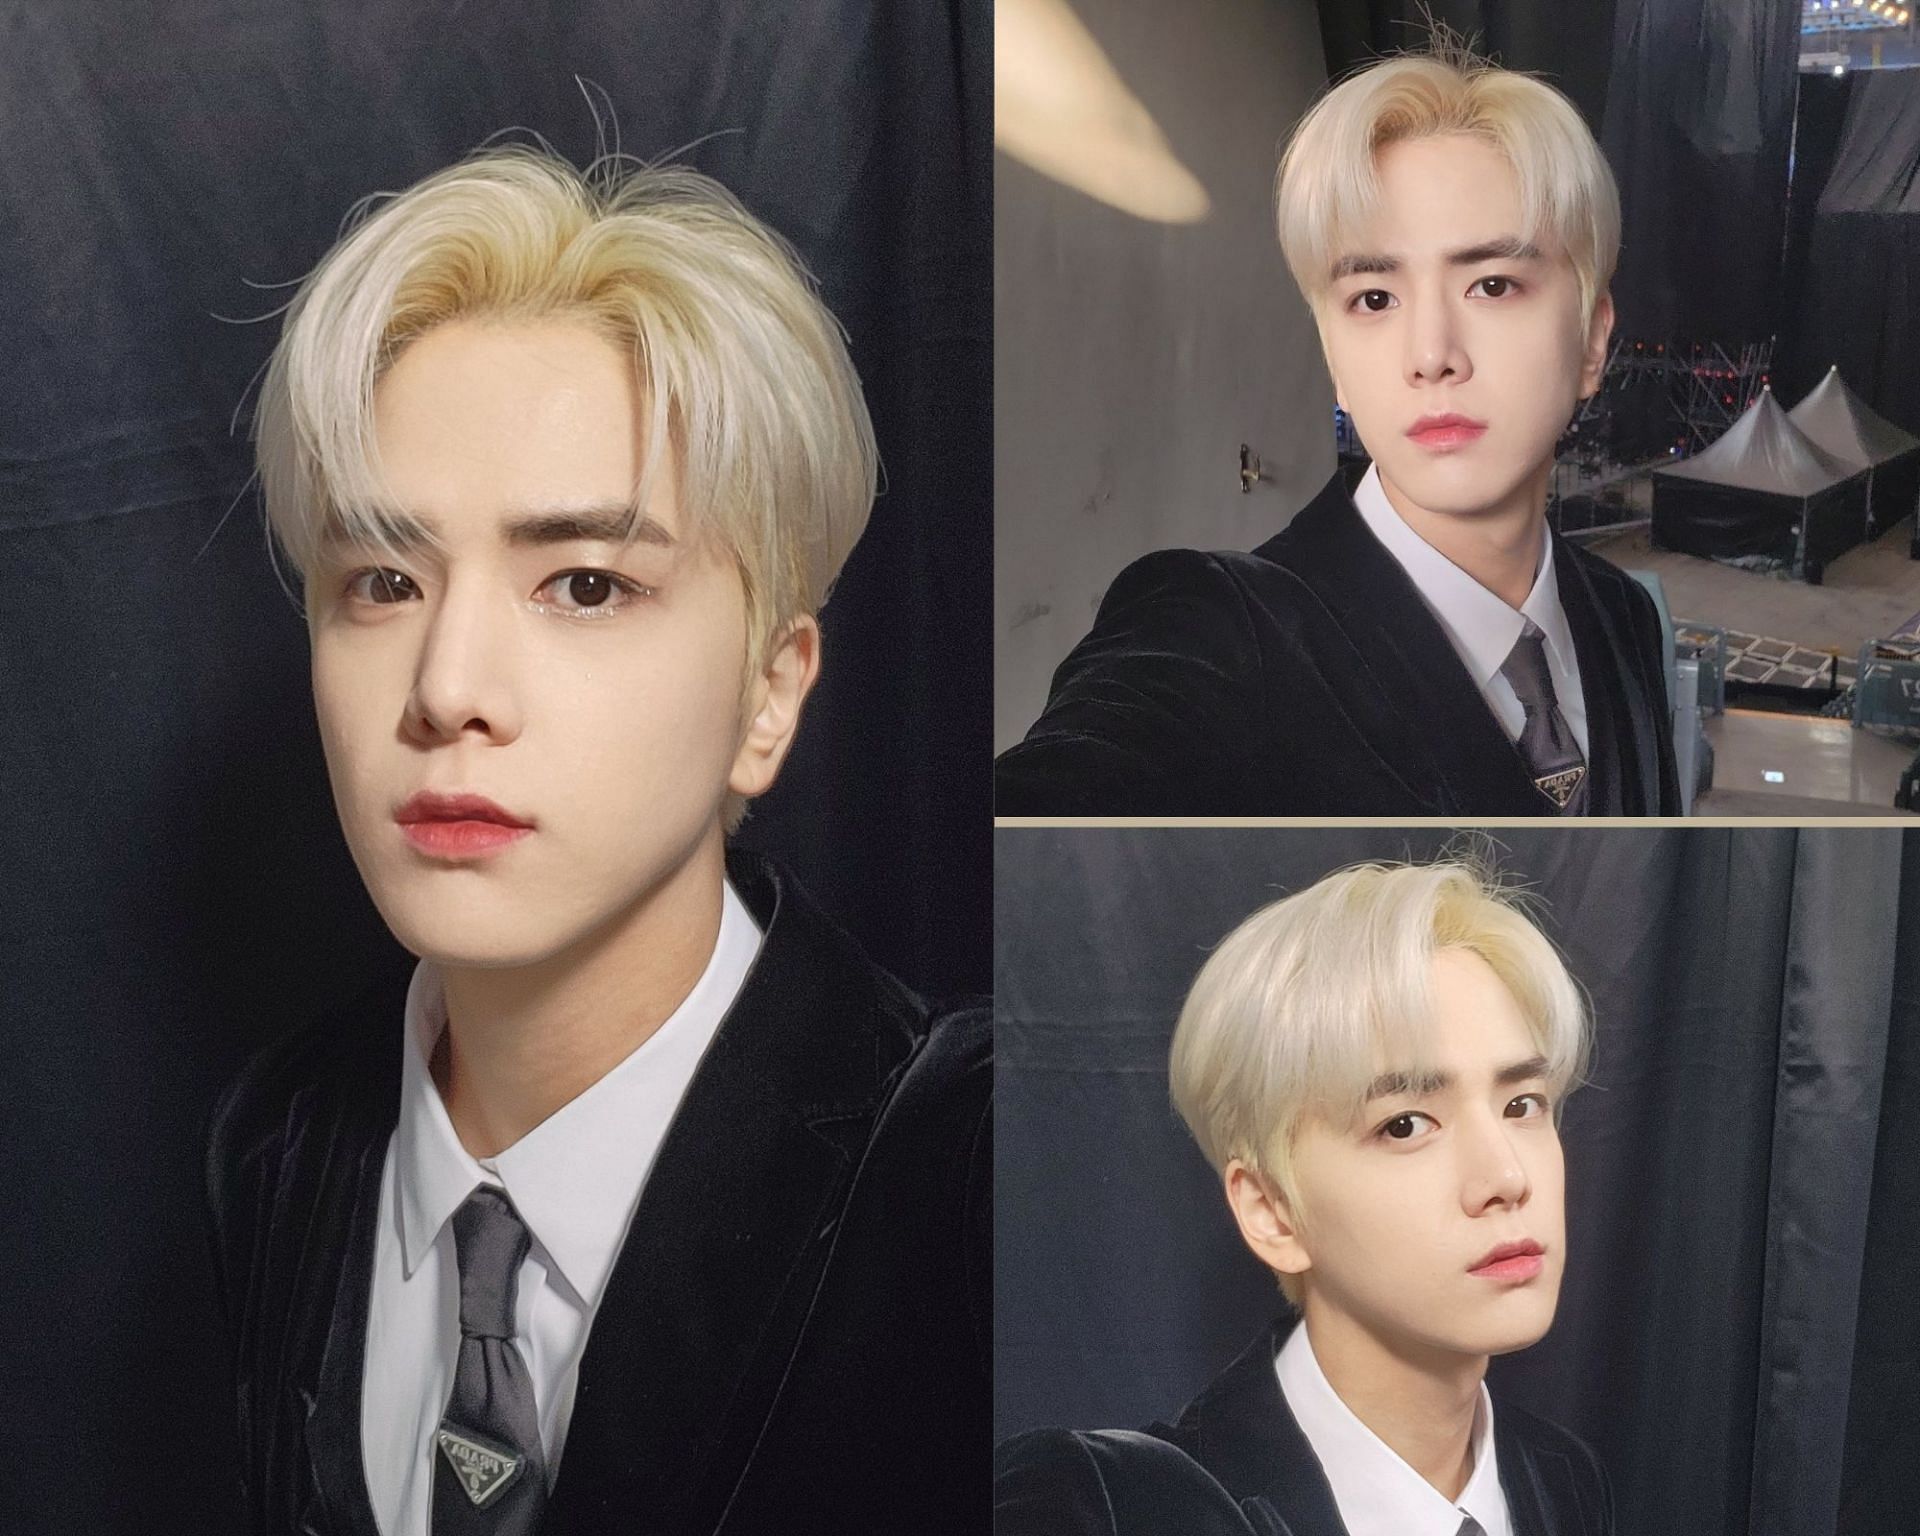 K-Pop singer and actor Younghoon (Images via Twitter/@WE_THE_BOYZ)